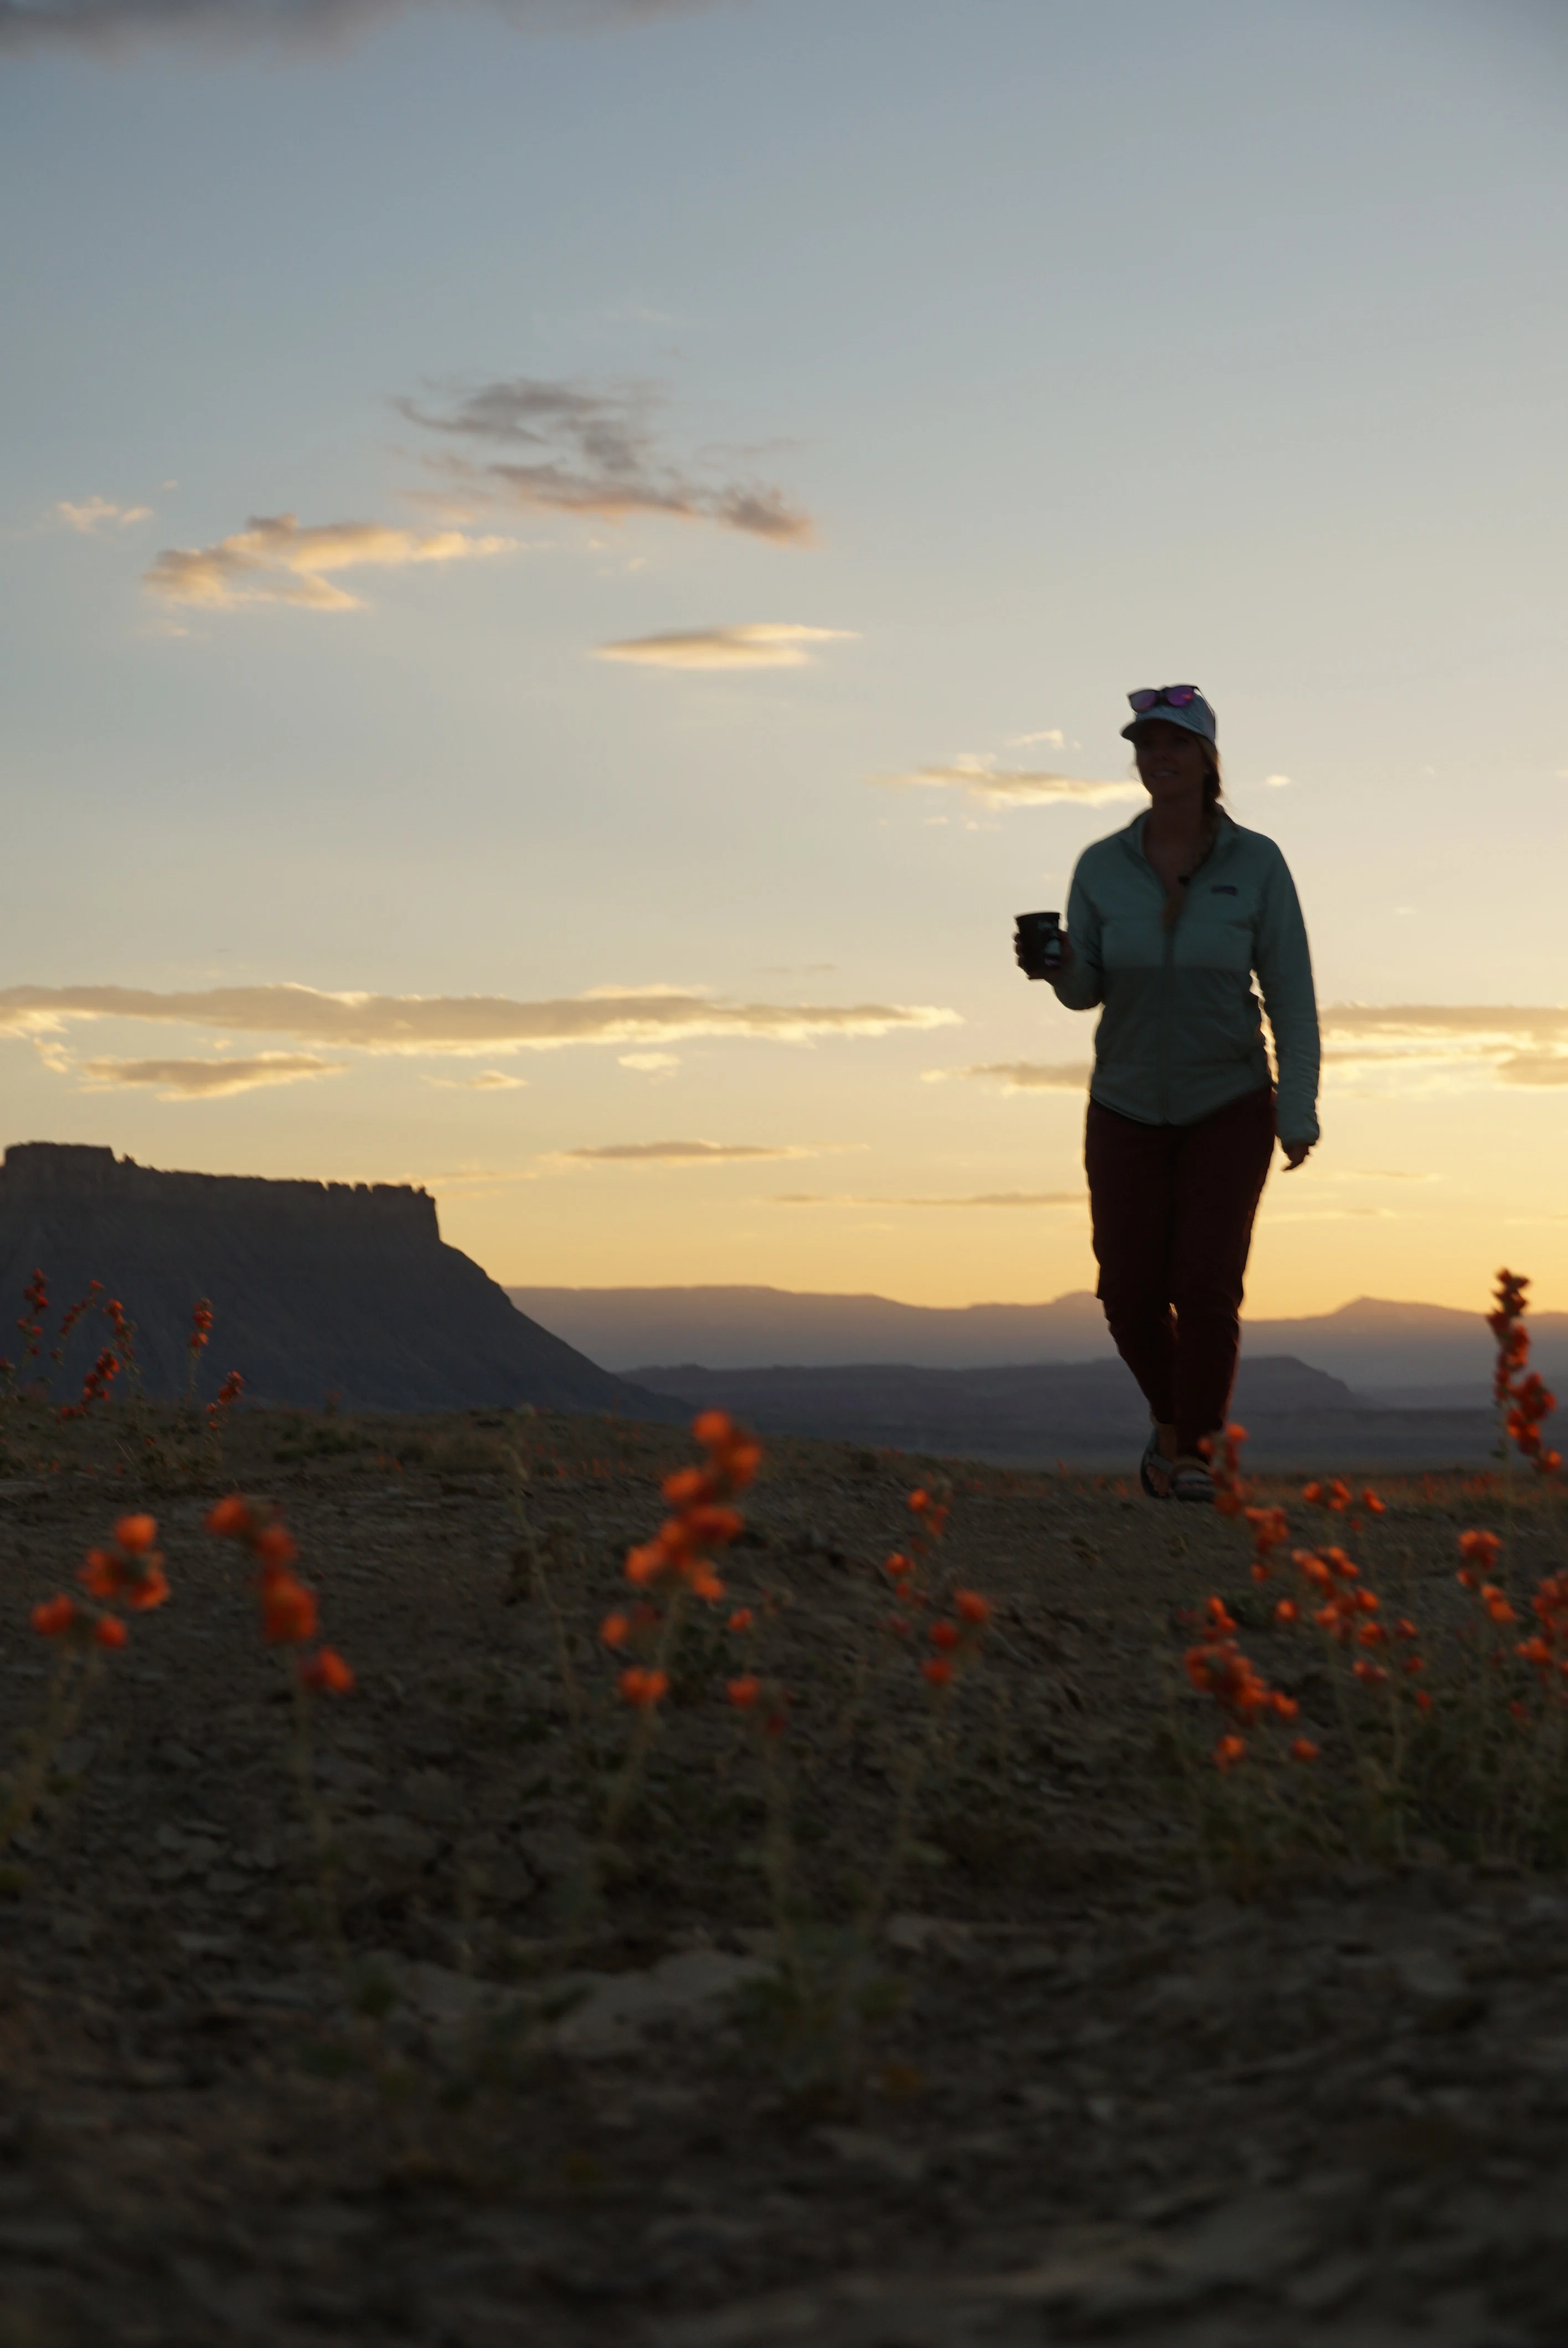 walking along skyline view at Moonscape overlook, a girl walking at sunset with orange wildflowers and factory butte in the distance